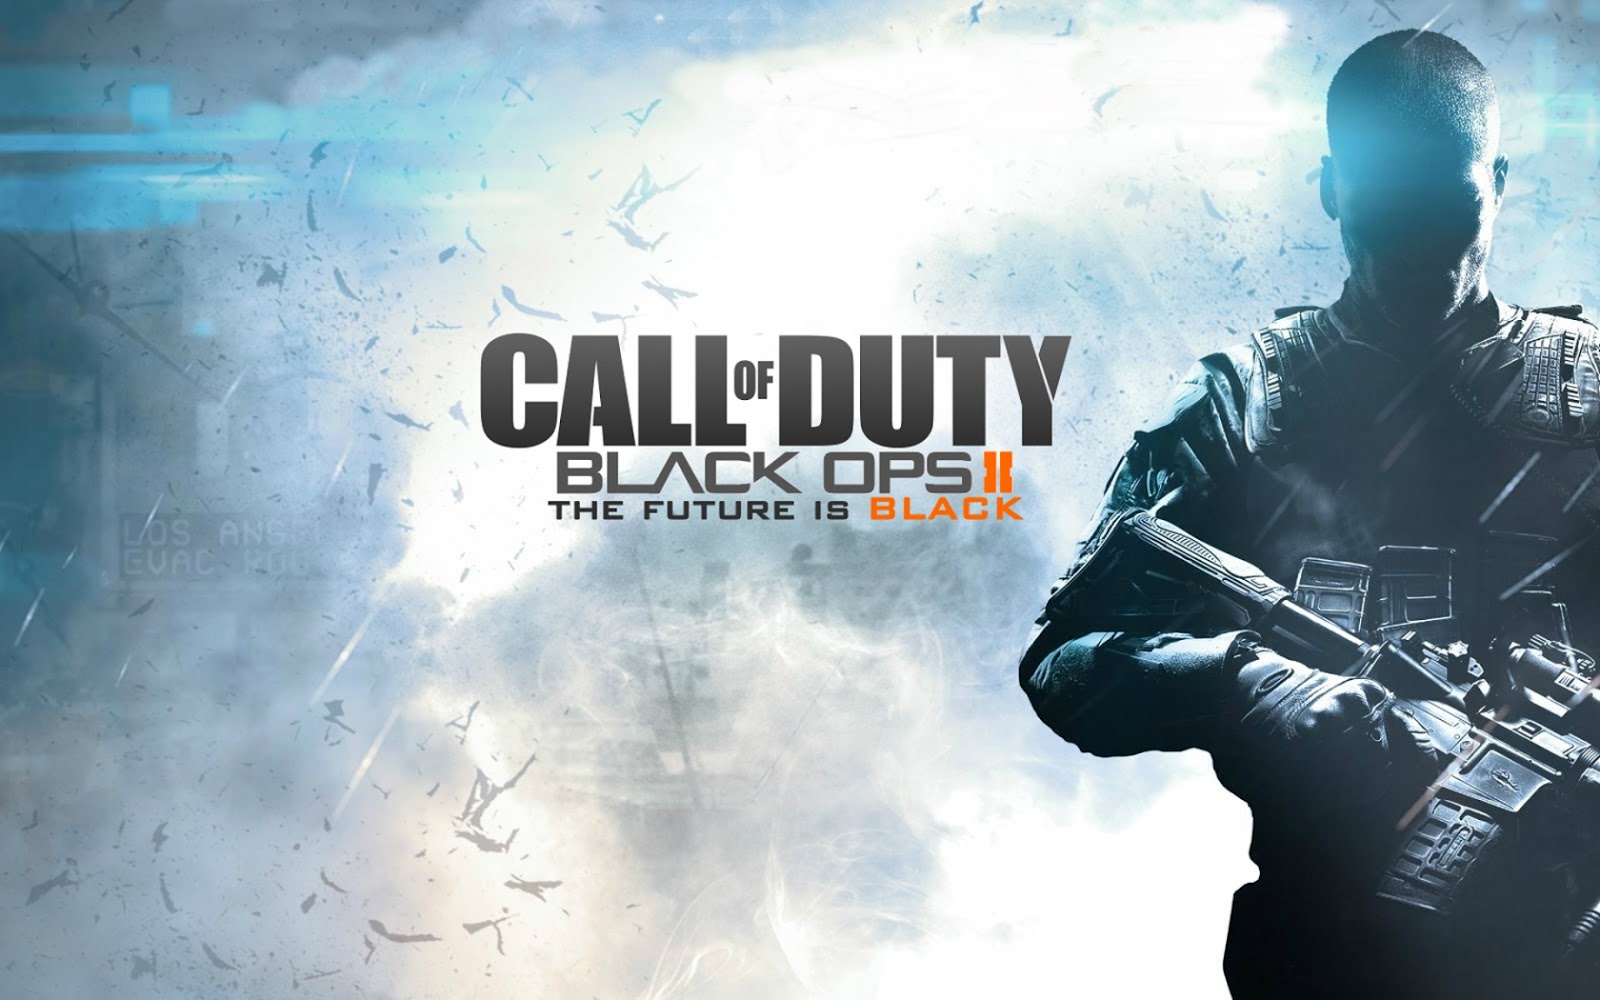 Hd Wallpapers Mania Call Of Duty Black Ops 2 Hd Wallpapers